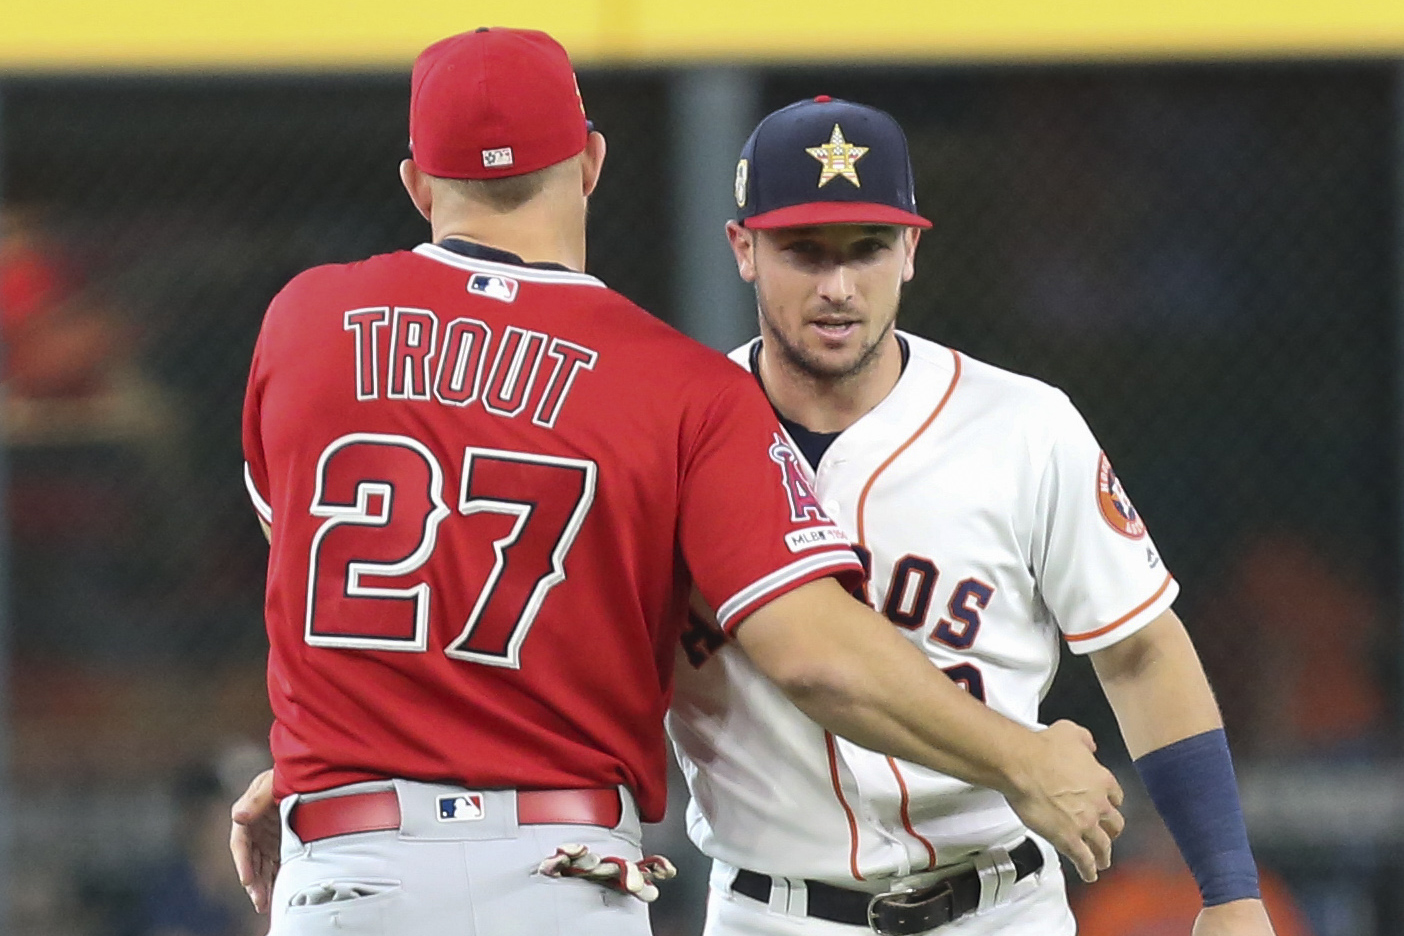 Smith: With Mike Trout out, AL MVP should belong to Astros' Alex Bregman